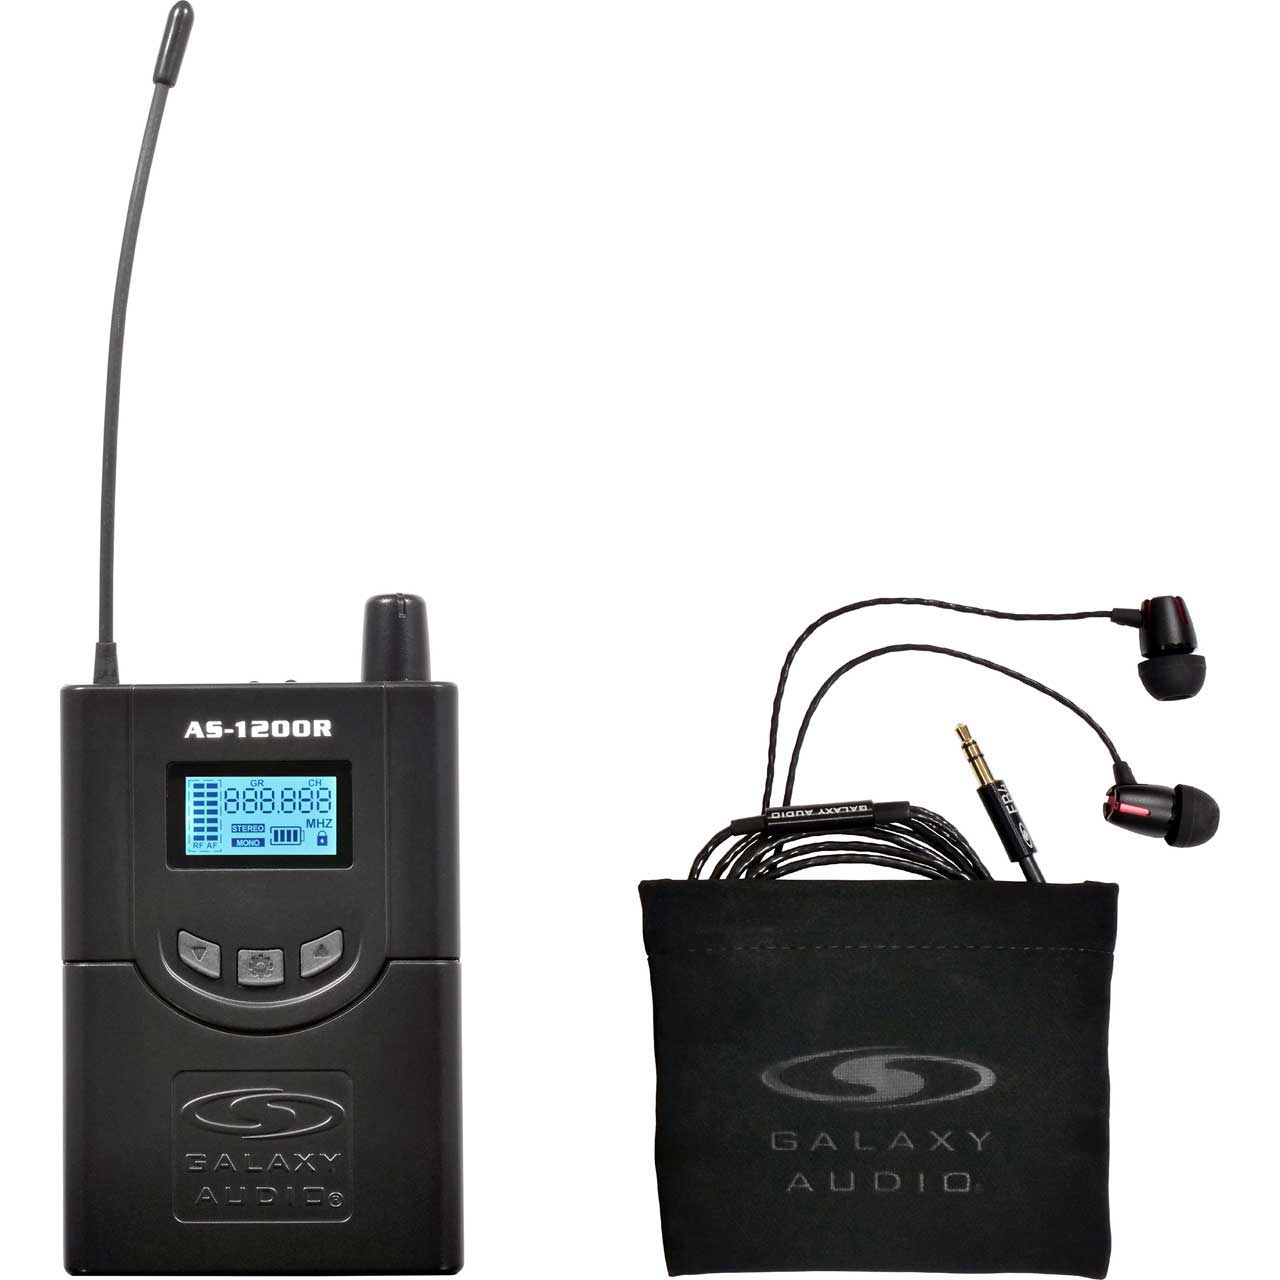 Galaxy Audio AS-1200RD 210 Channel Stereo Wireless Personal In-Ear Monitor Receiver with EB4 Earbuds - 584-607 MHz GXY-AS-1200RD